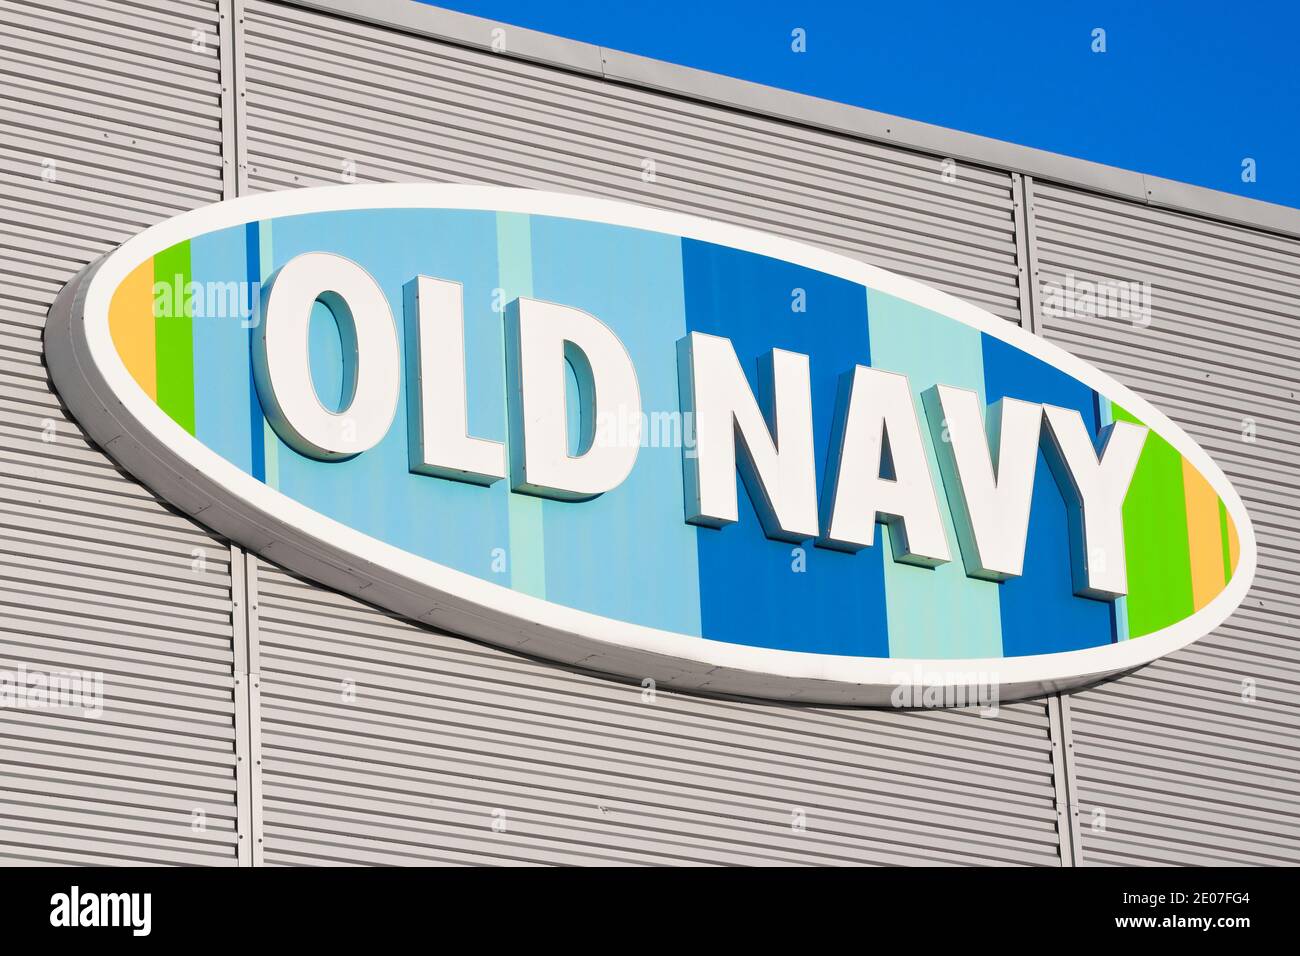 Dartmouth, Canada - July 03, 2016: Old Navy outlet sign. Old Navy is a retail clothing and accessories chain. It is a division of Gap Inc. and was fou Stock Photo